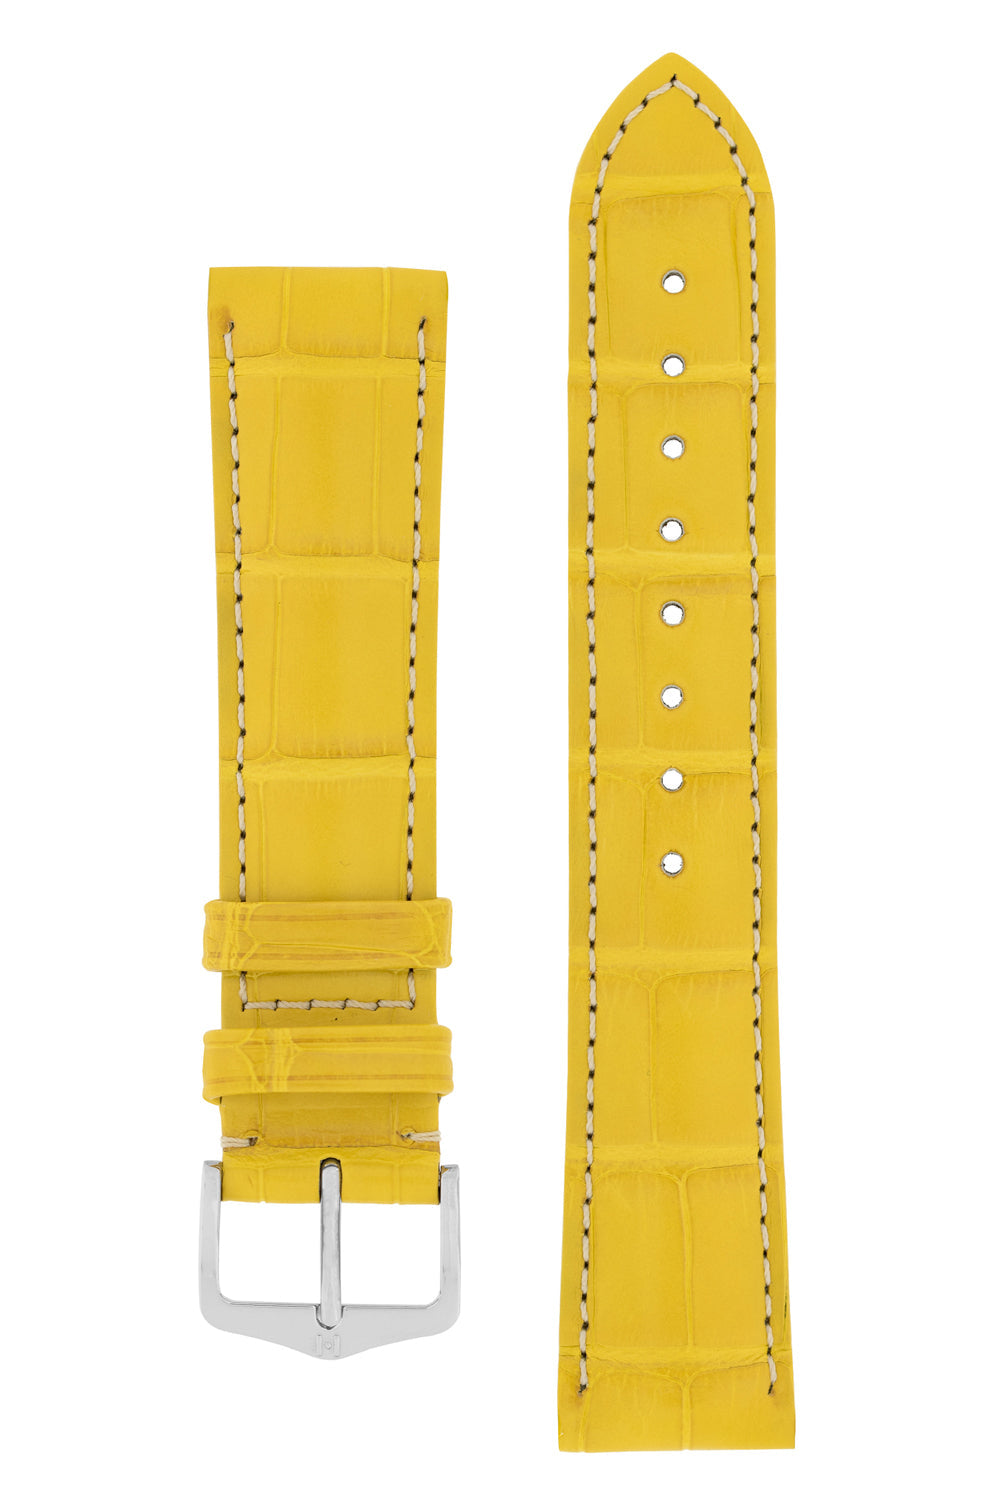 Hirsch Connoisseur Genuine Alligator Watch Strap in Yellow (with Polished Silver Steel H-Tradition Buckle)